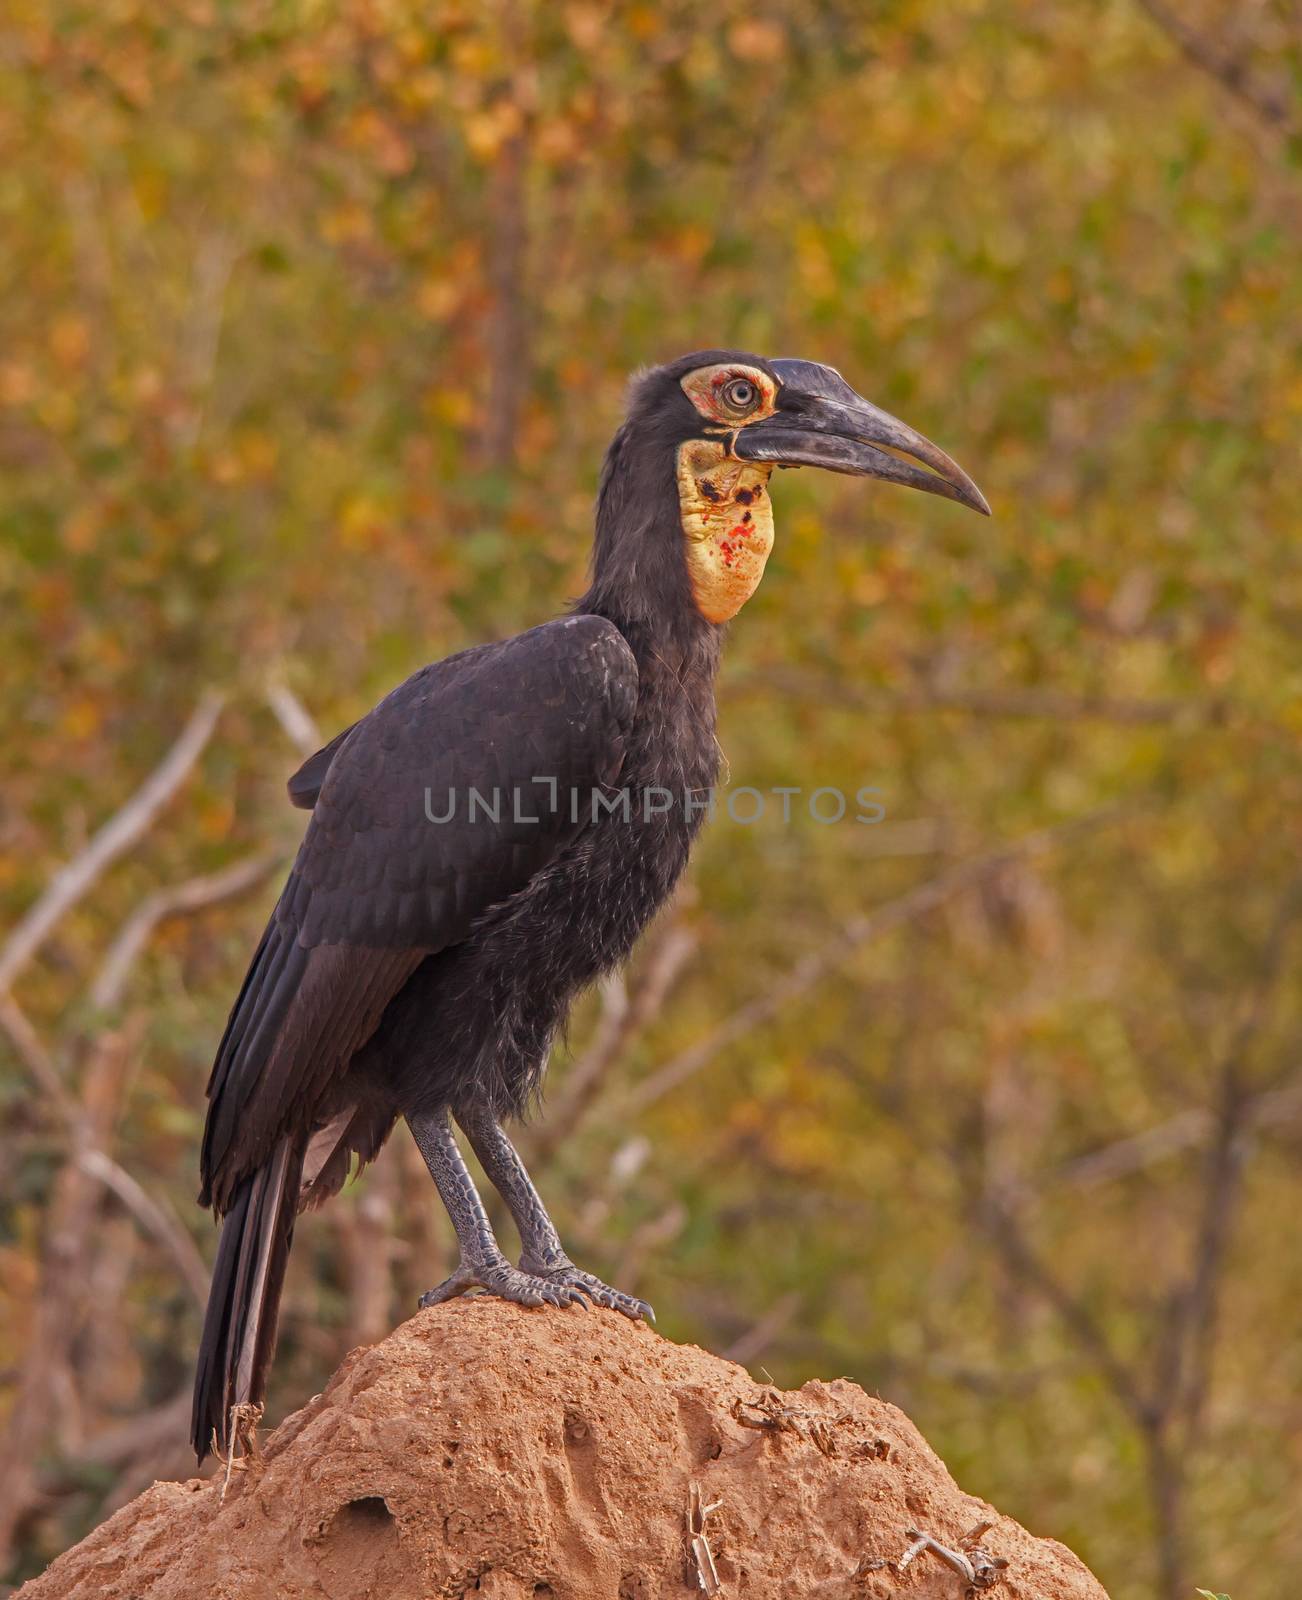 The Immature Southern Ground Hornbill (Bucorvus leadbeateri), seen here perching on an ant nest, already resembles the adult, but the bare parts of the face and the fleshy part on the throat, called the wattle, will turn bright red.